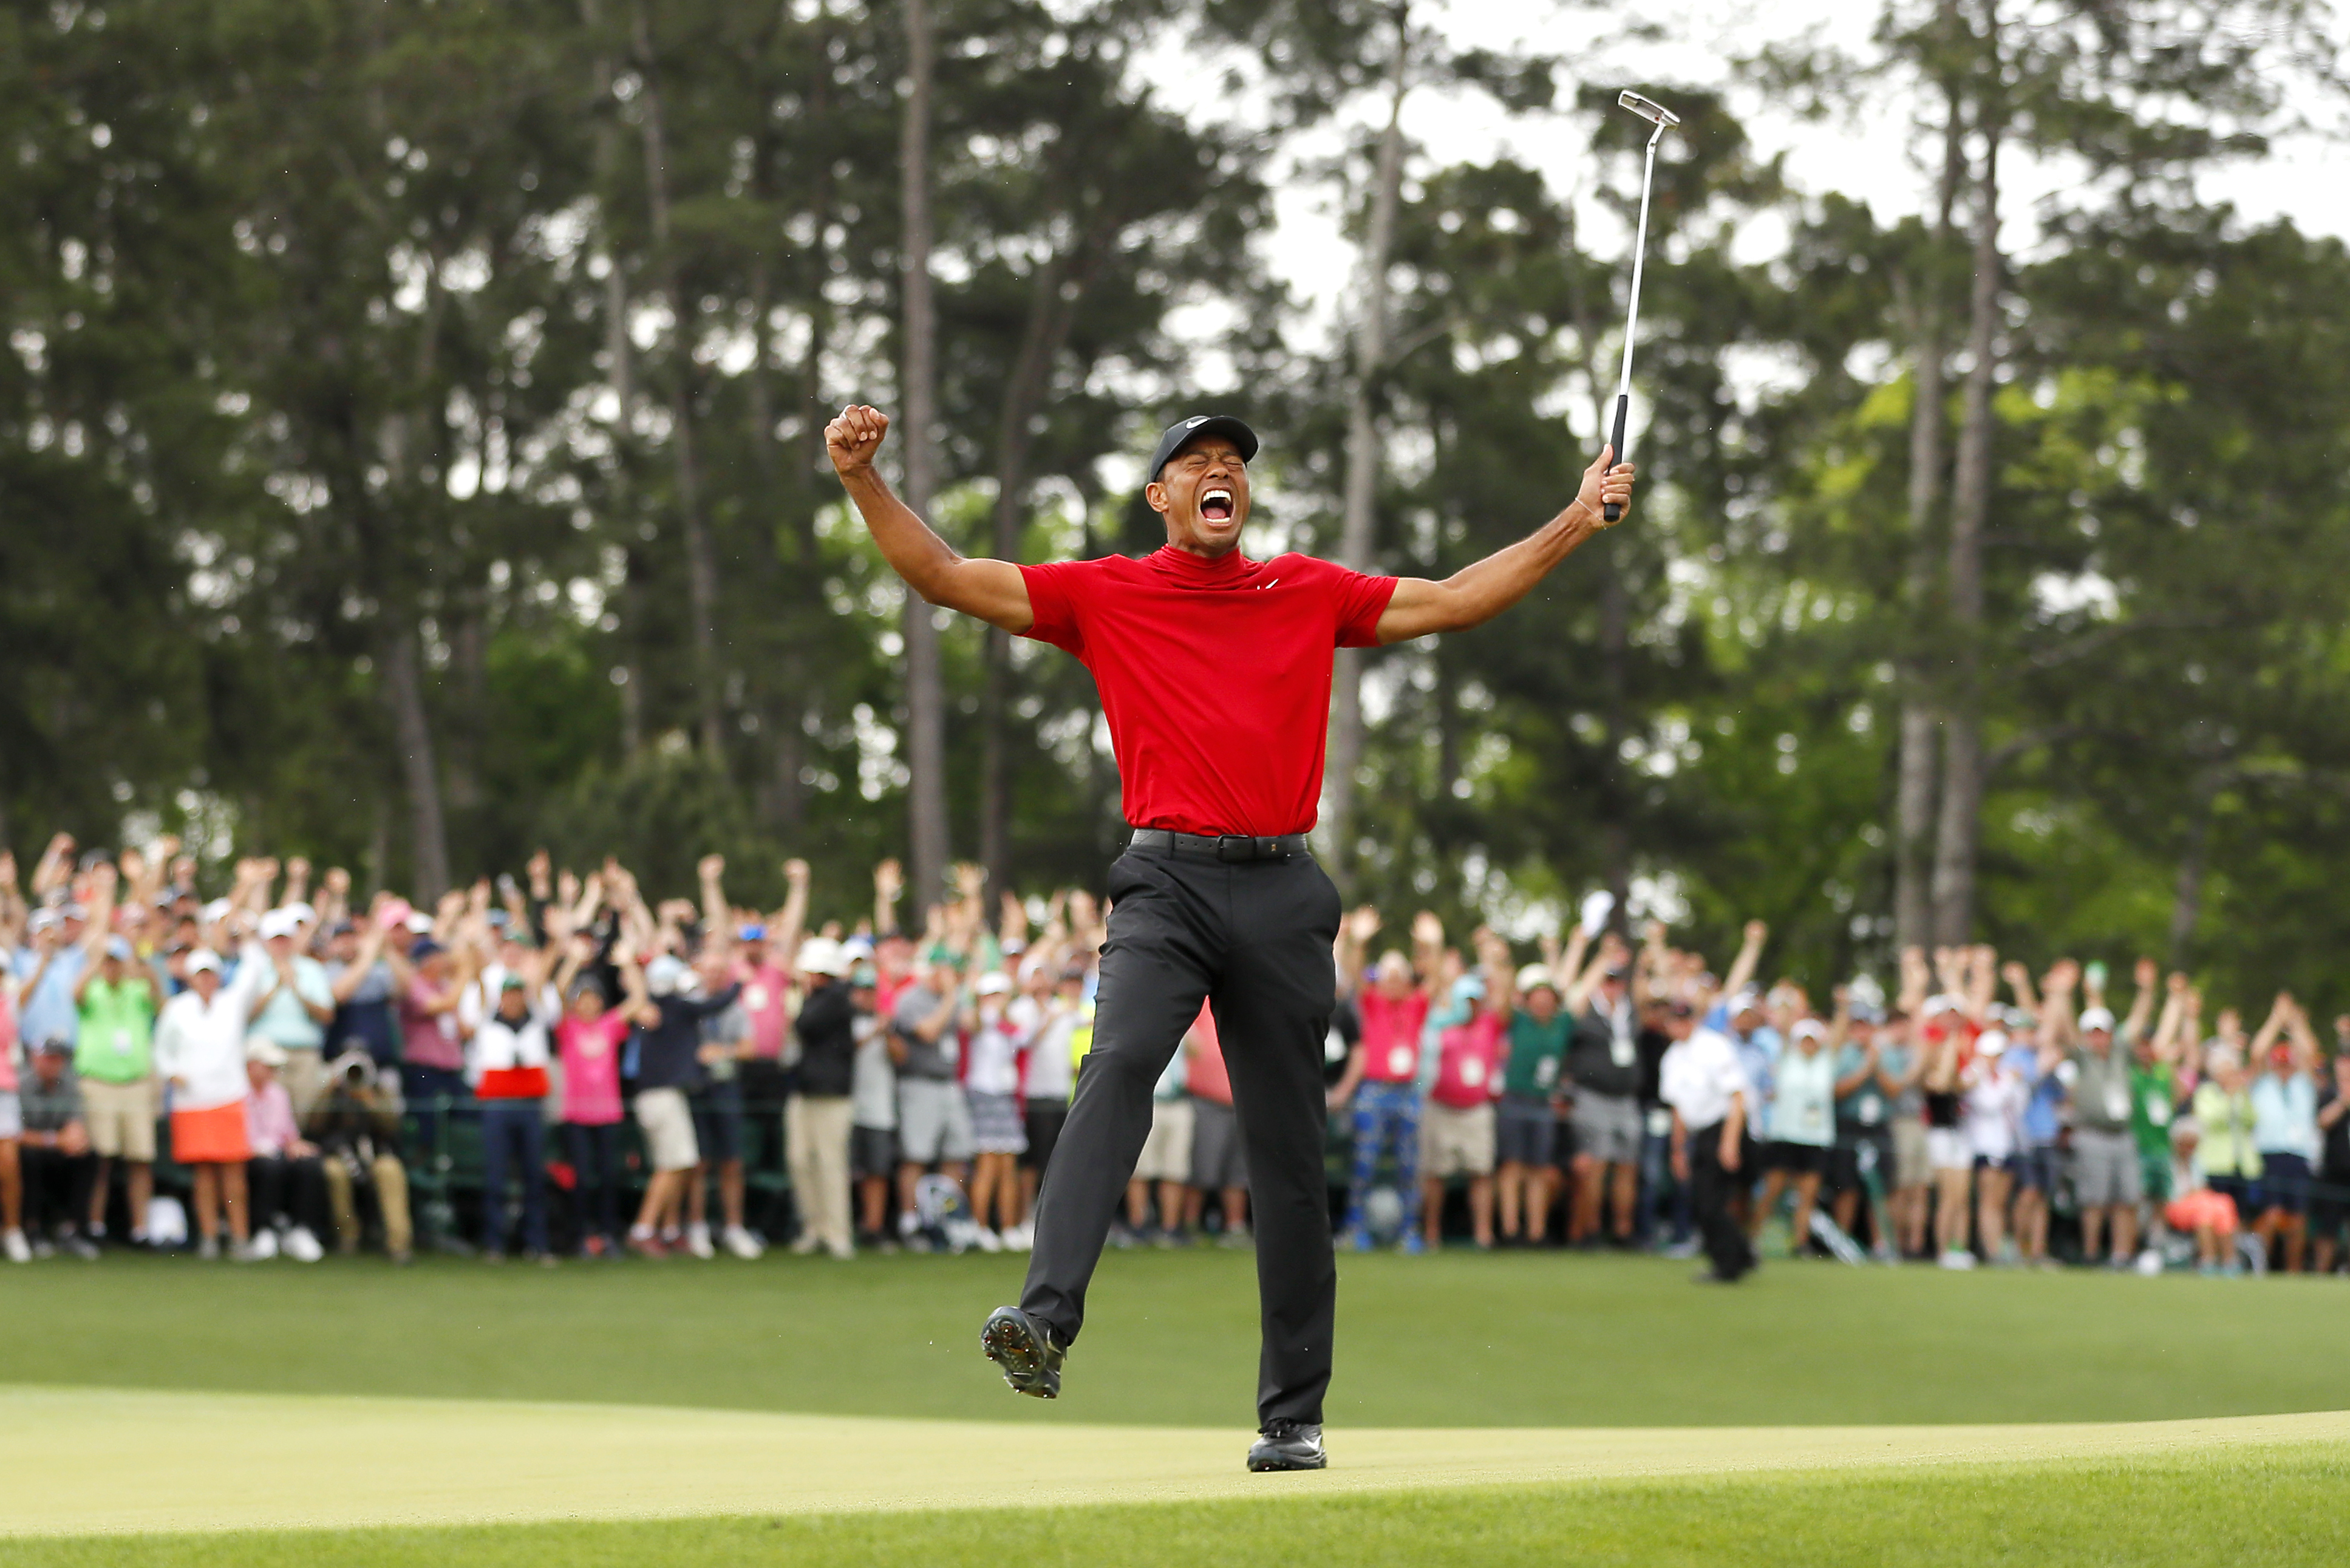 What are the Traits of a Successful Golfer at the Masters?